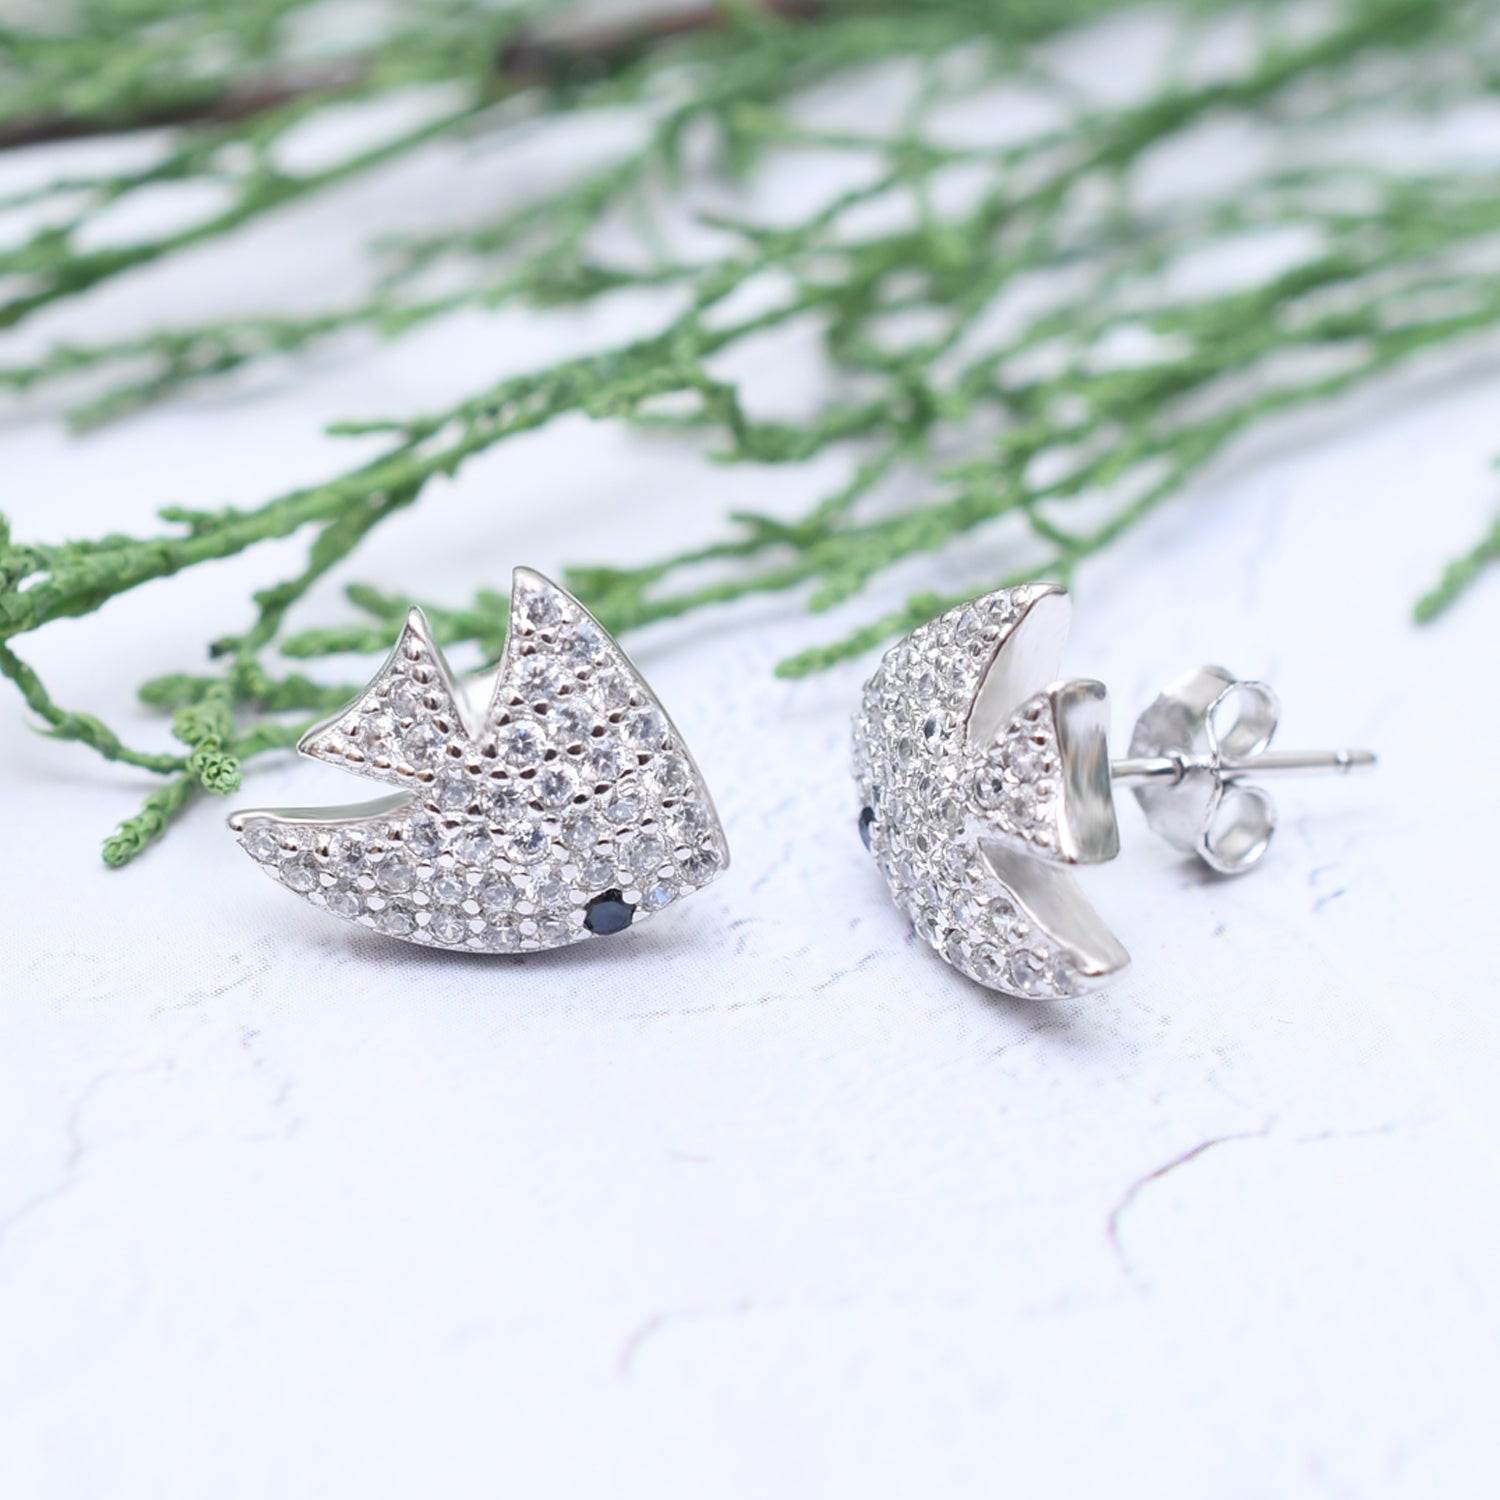 Silver Sparkling Queen Angel Fish Earrings